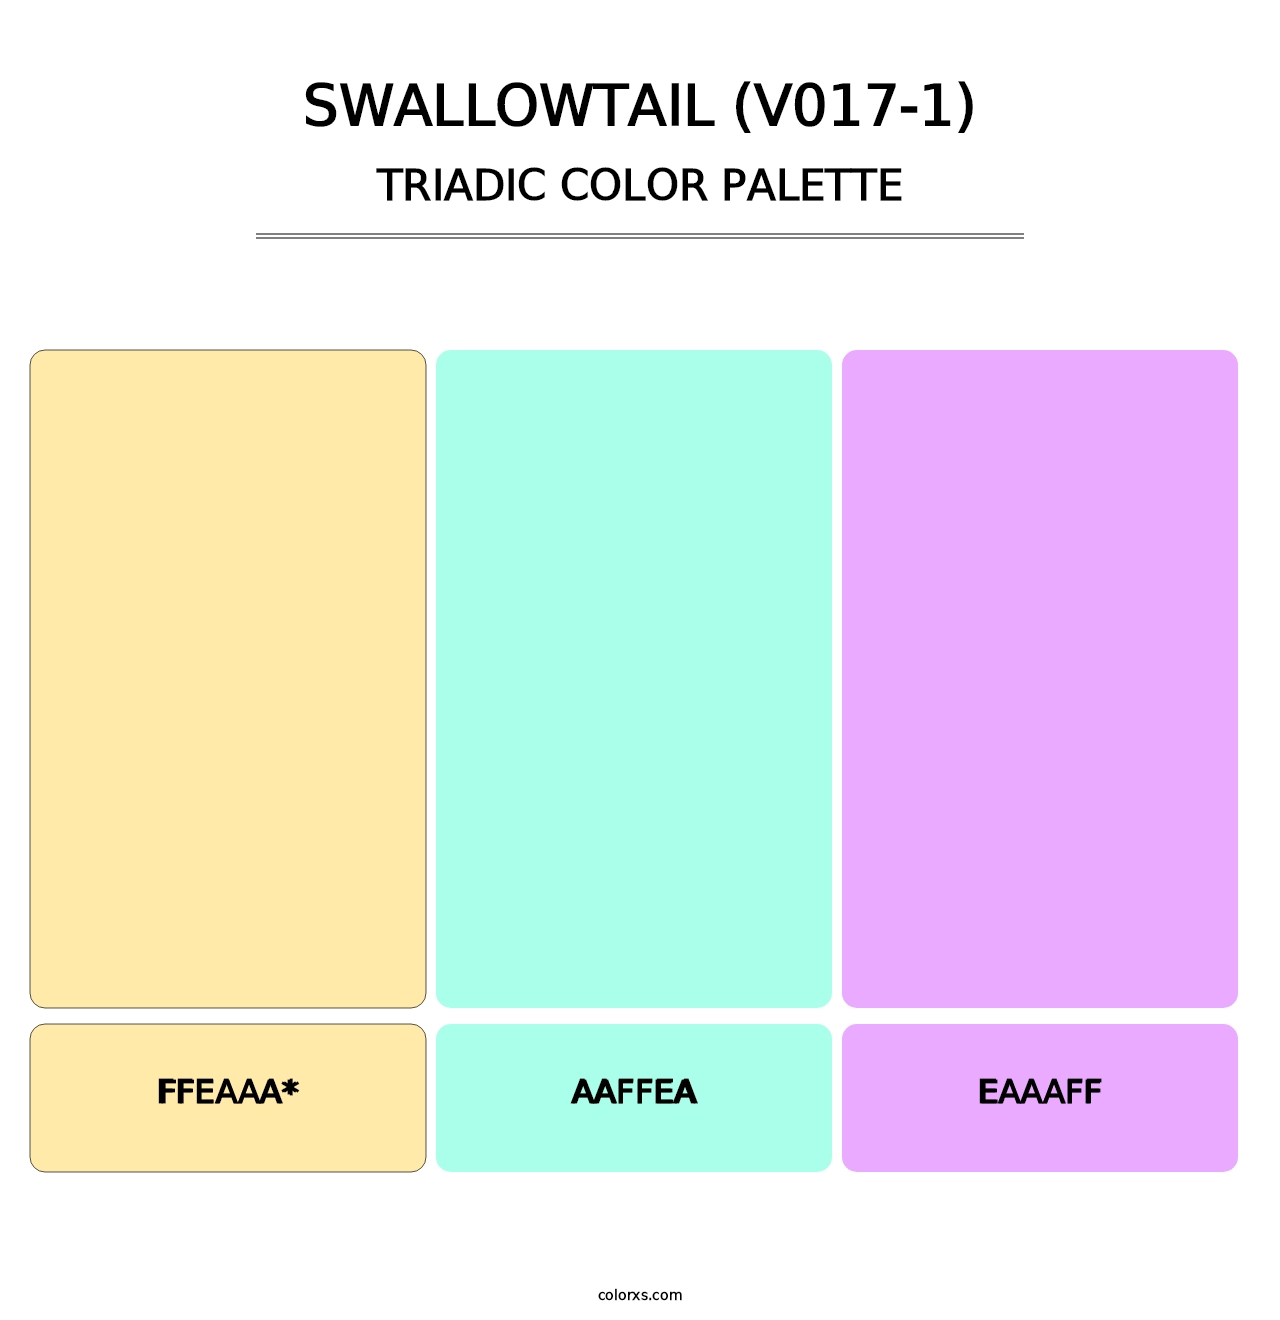 Swallowtail (V017-1) - Triadic Color Palette